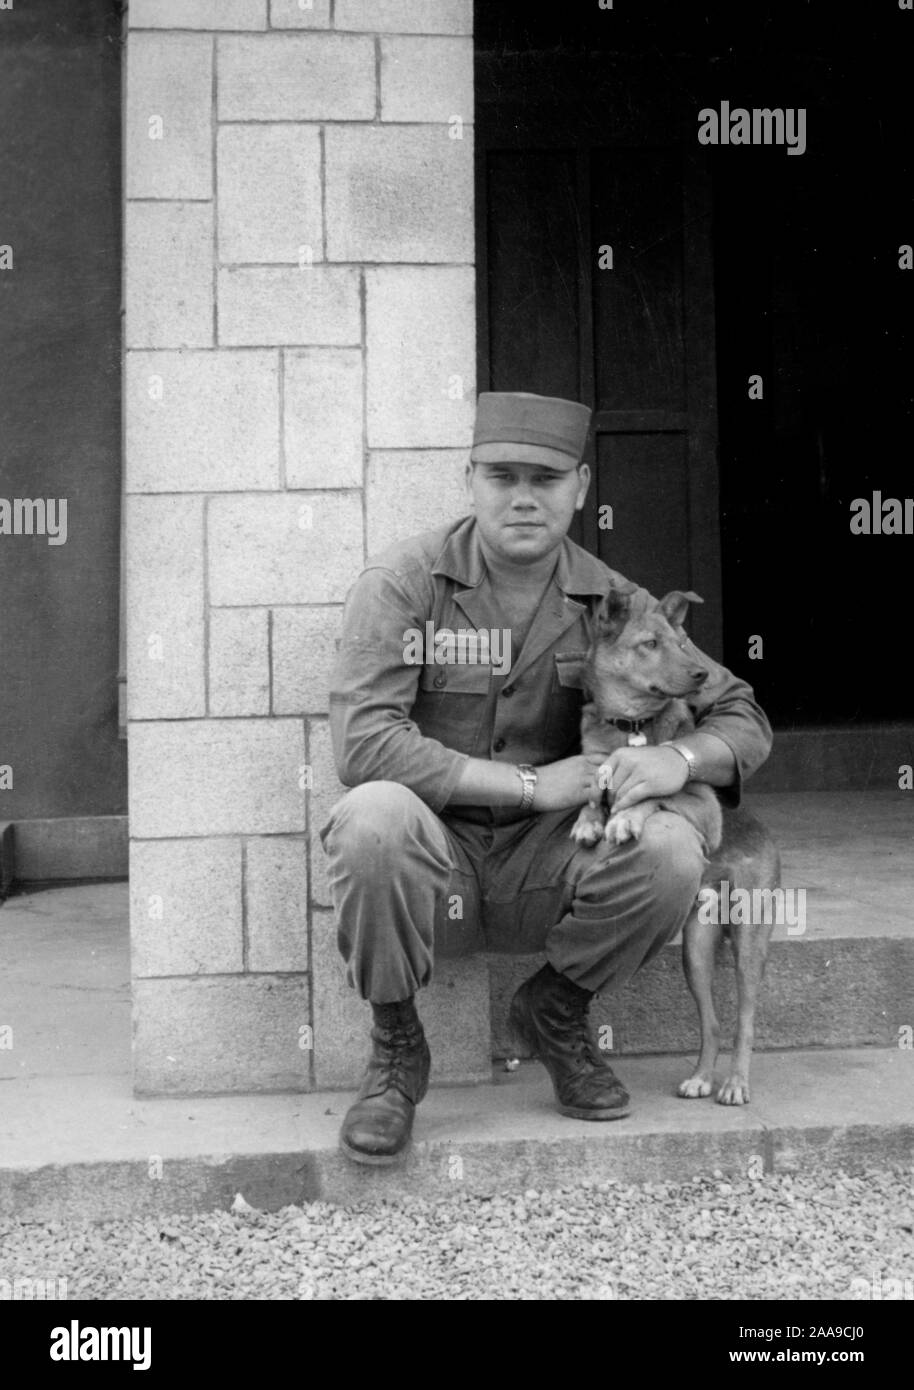 US Army soldier holds  a dog on base during the Korean War, ca. 1953. Stock Photo